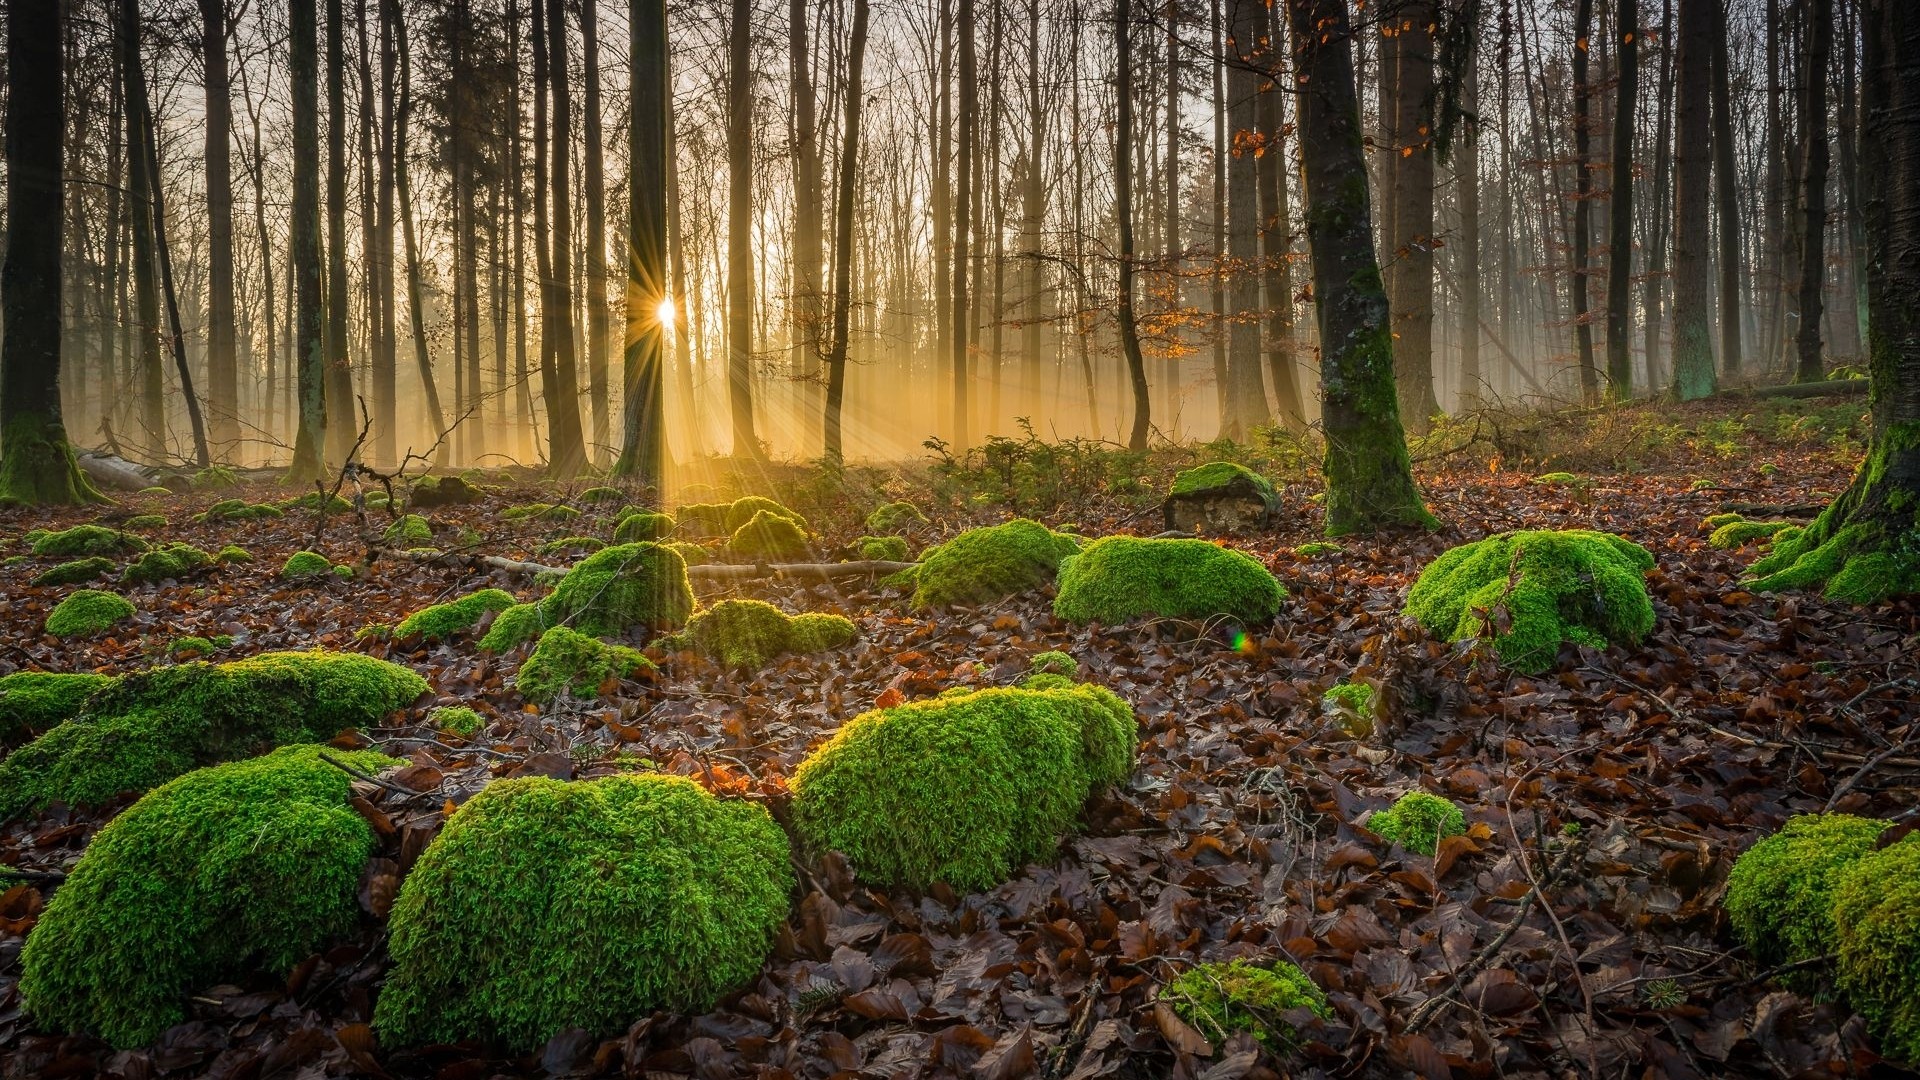 General 1920x1080 nature trees forest fall leaves moss sun rays sunlight plants